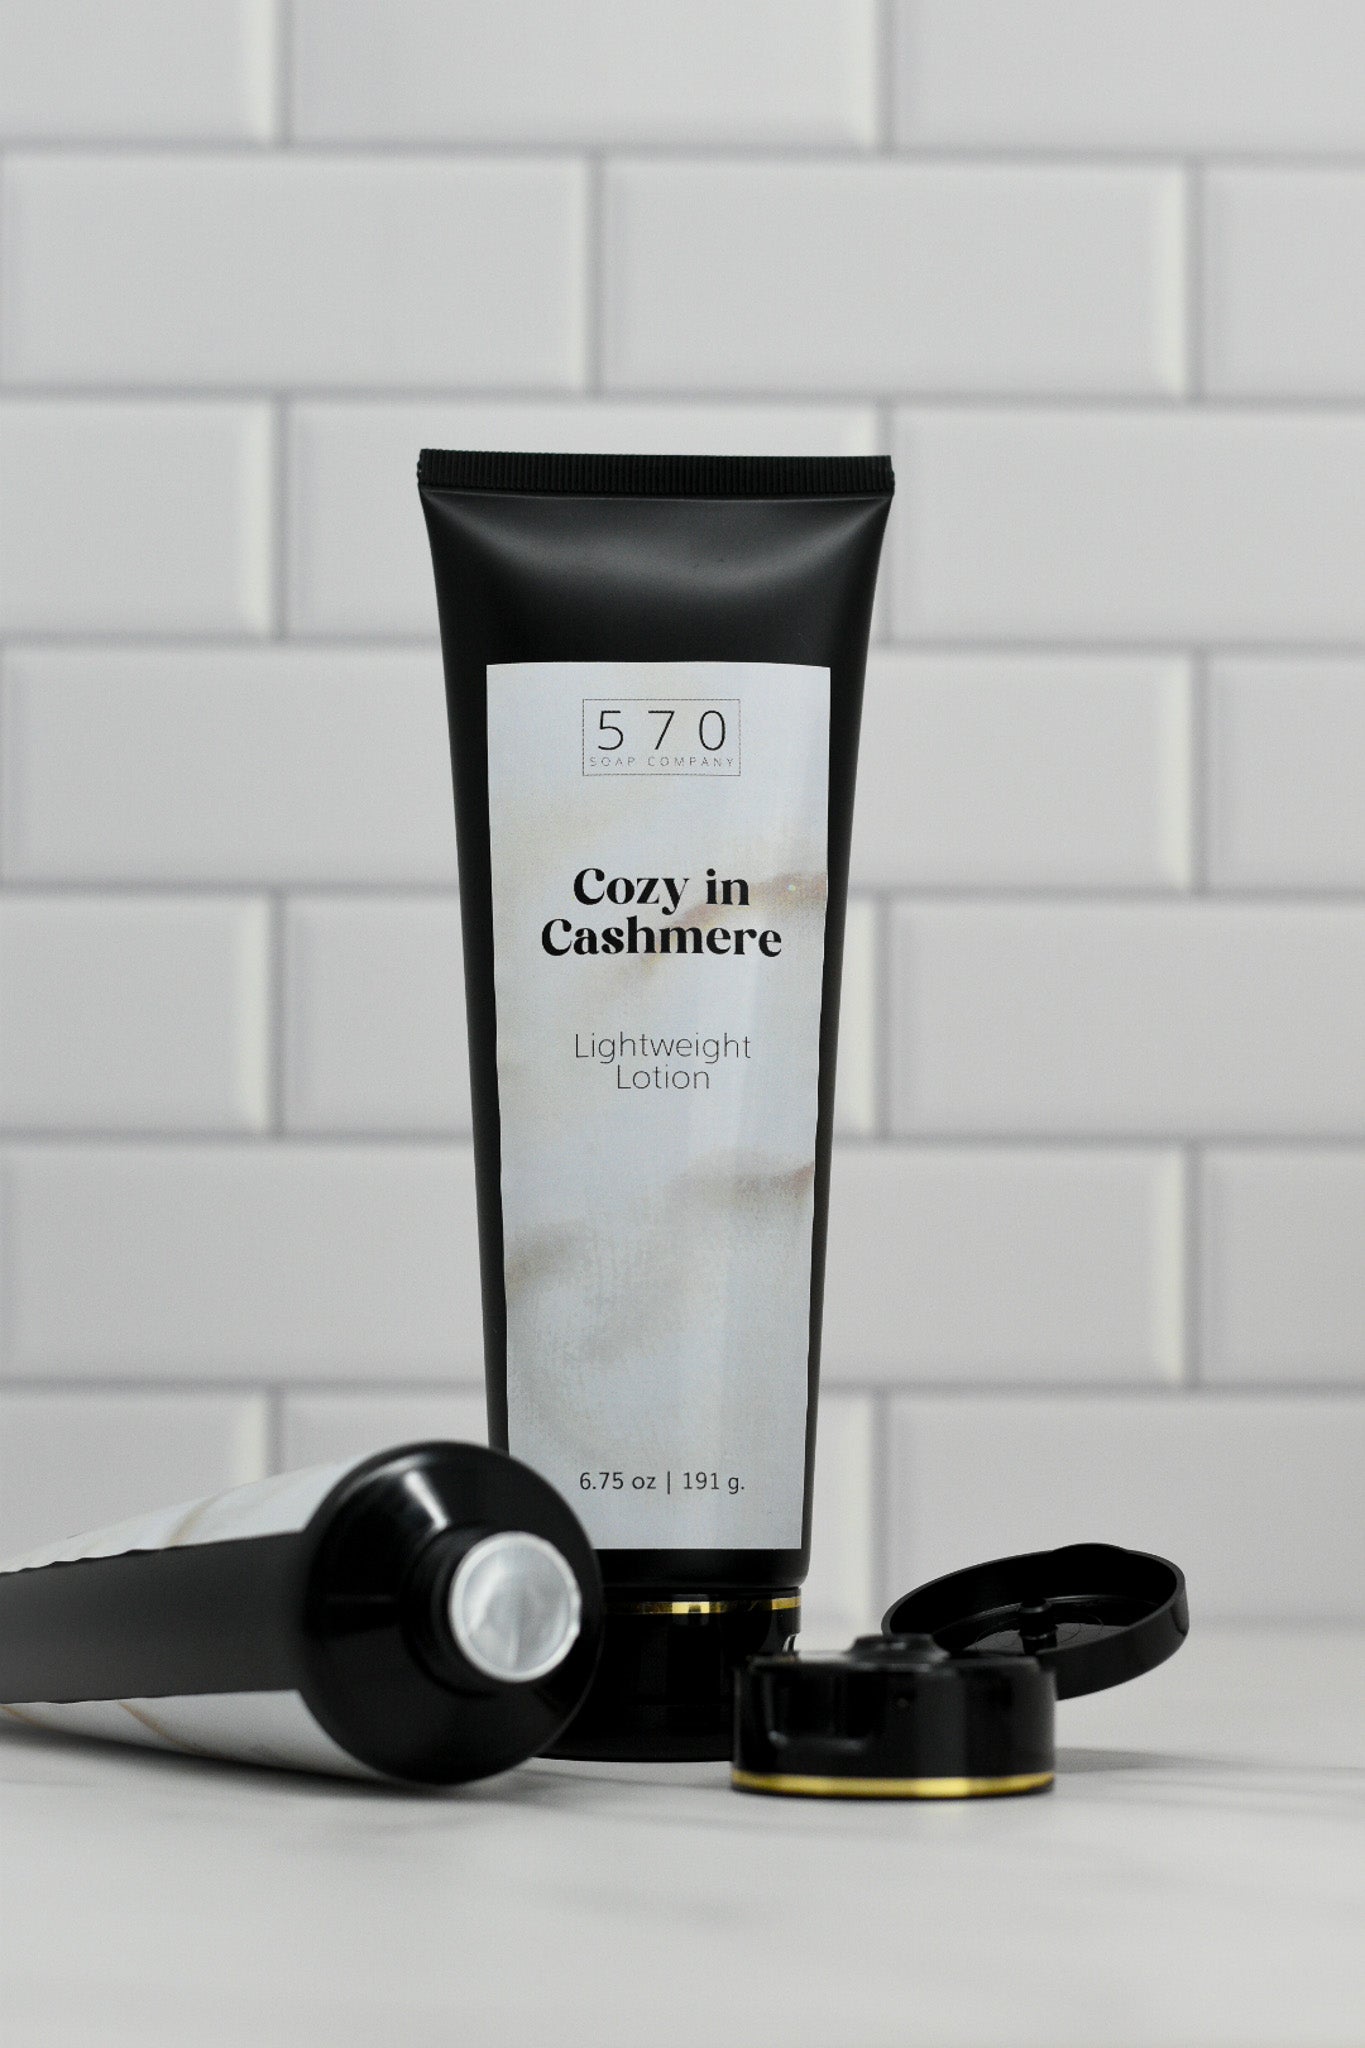 Cozy in Cashmere Lightweight Lotion